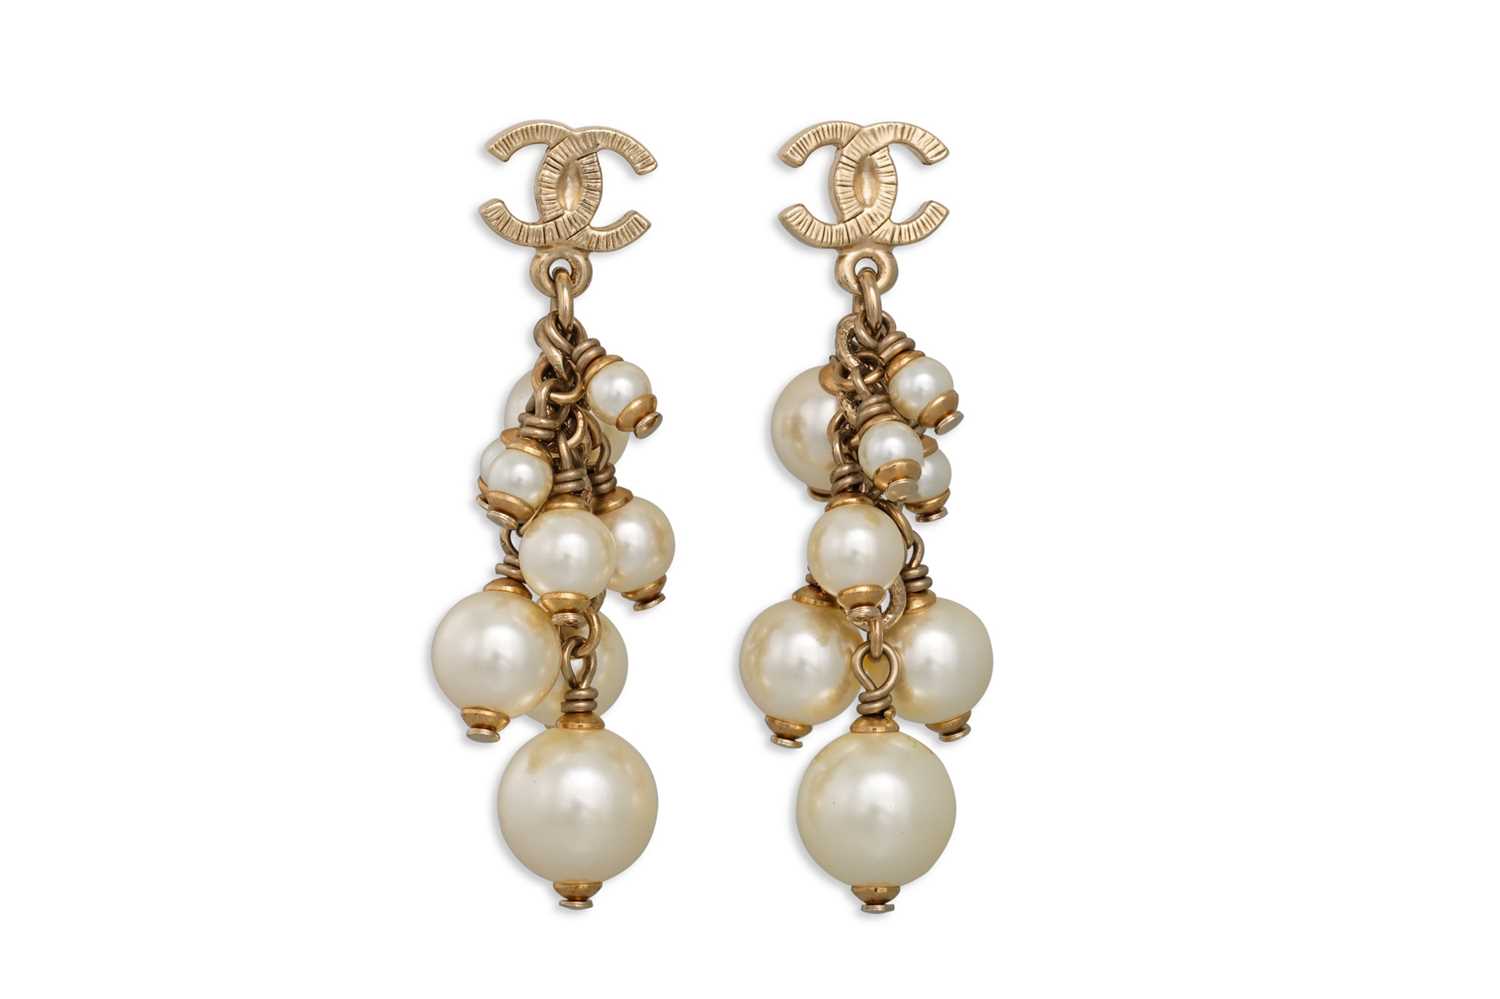 Lot 8 - A PAIR OF CHANEL DROP EARRINGS, the double C